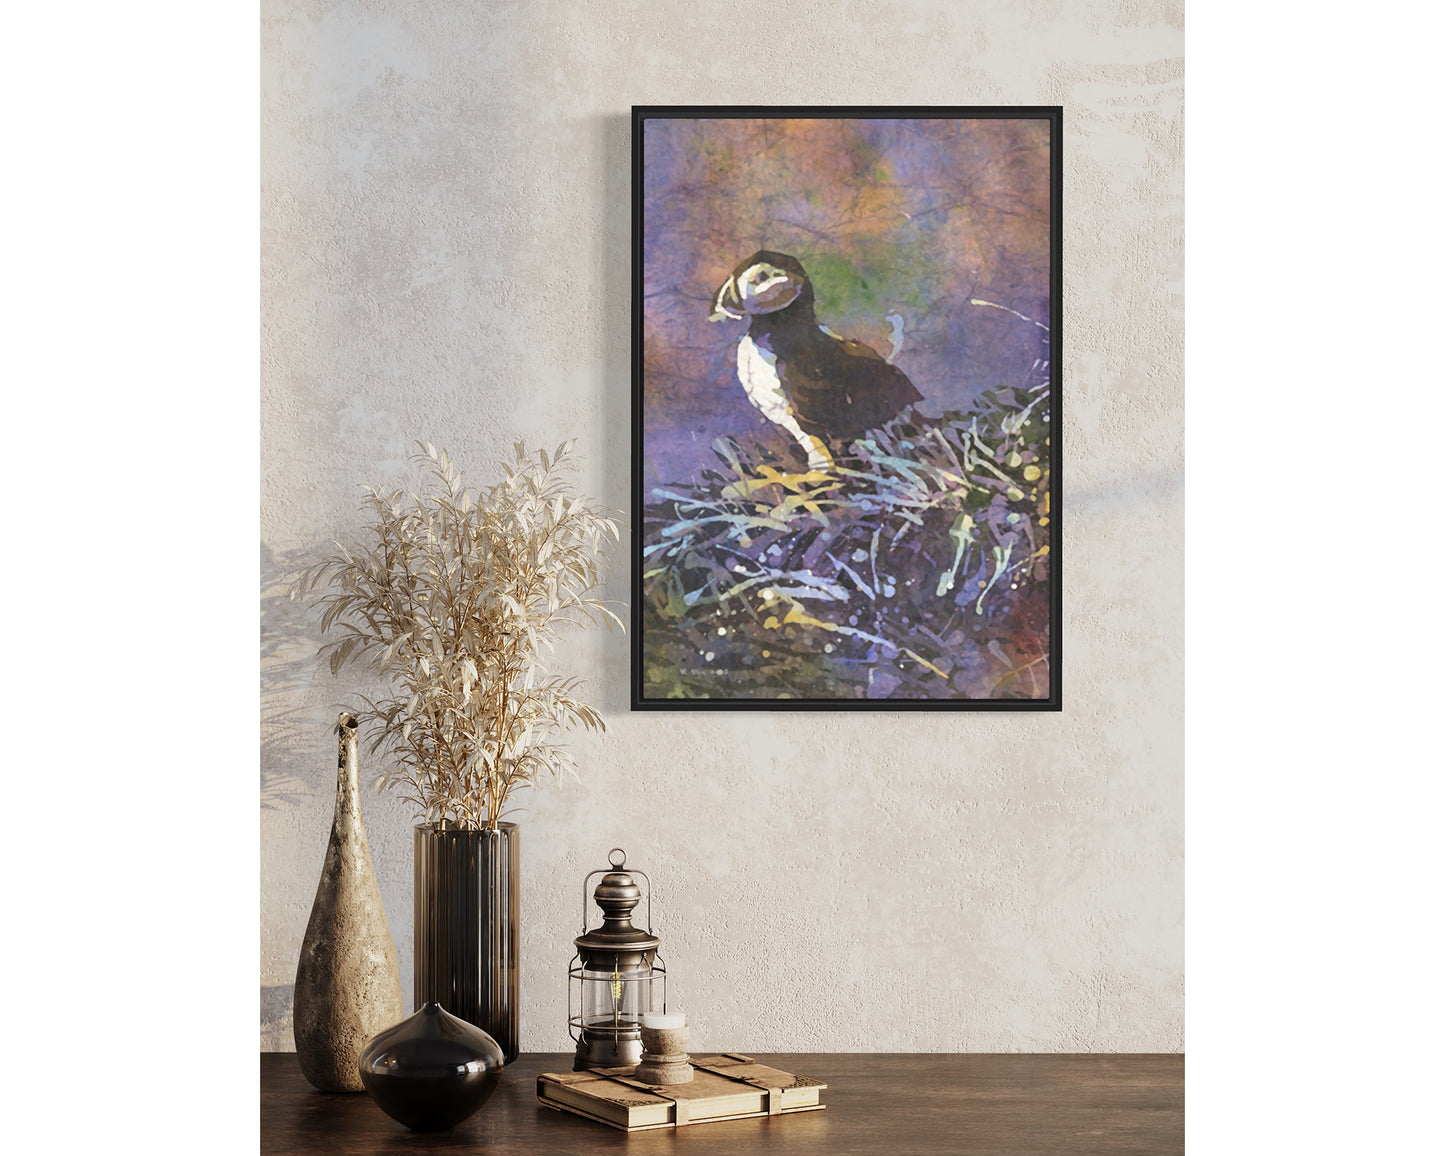 Icelandic puffin fine art watercolor painting.  Watercolor painting Puffin Iceland bird artwork (original painting)